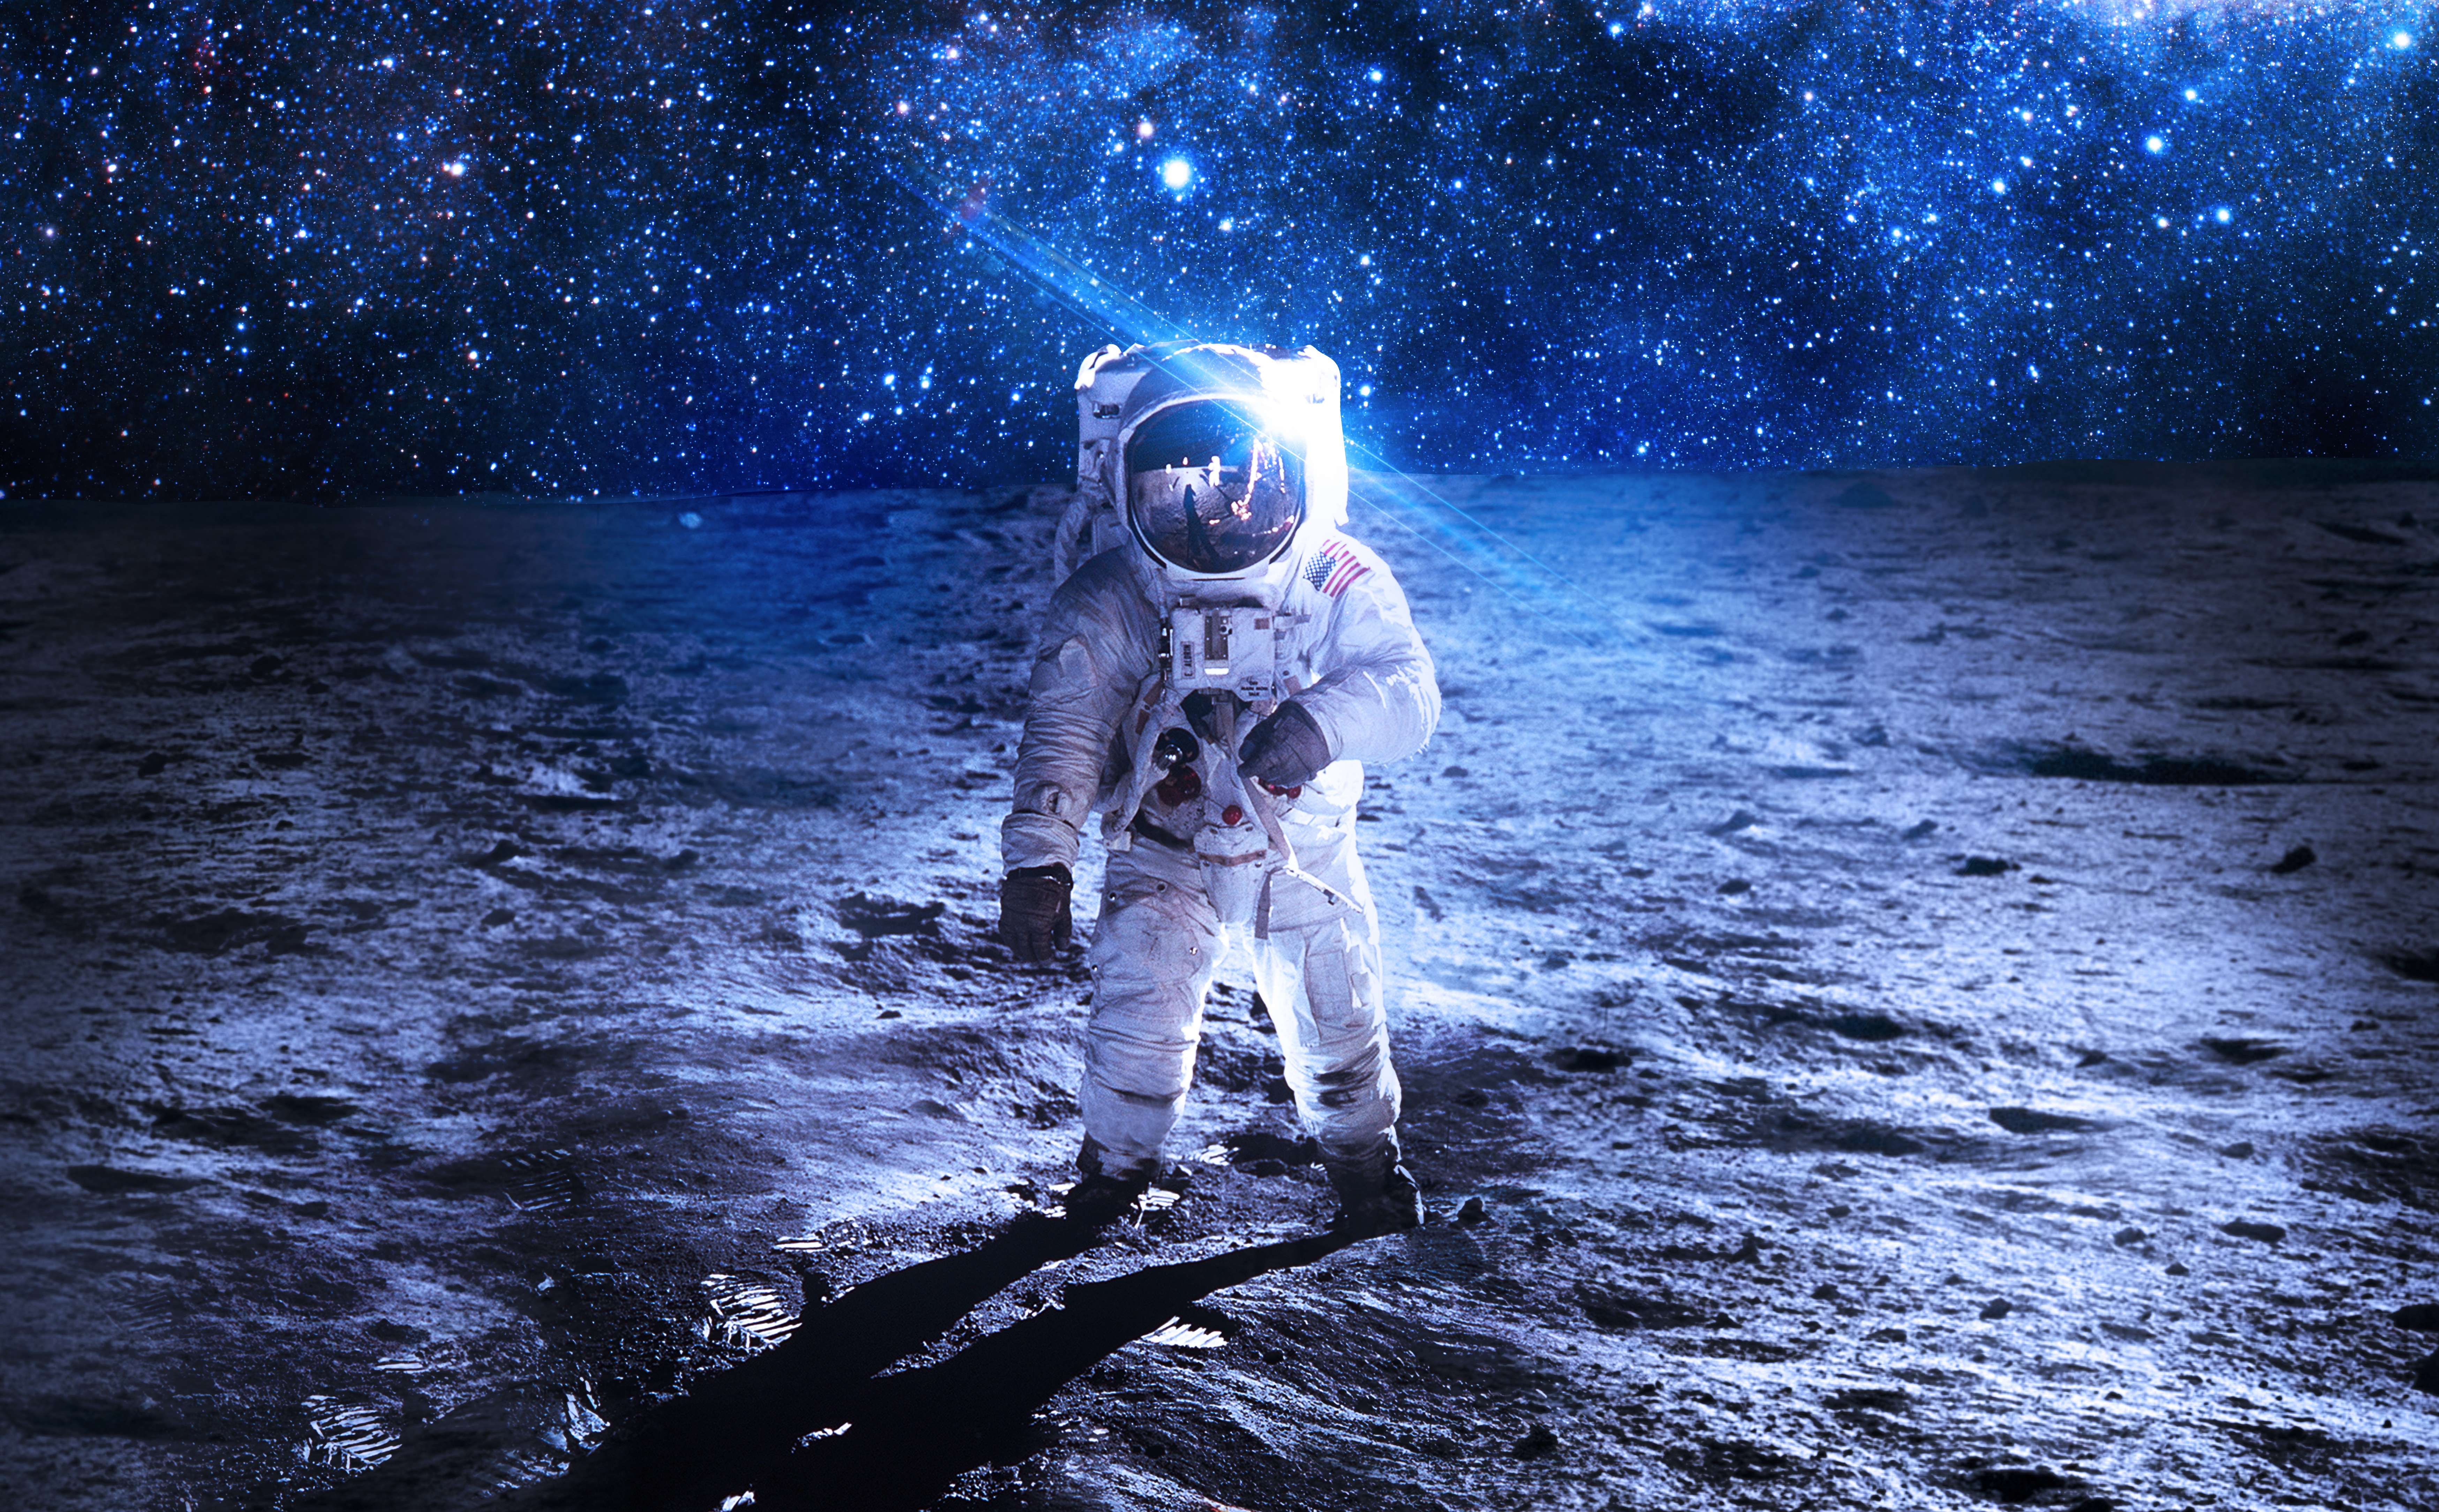 astronaut wallpaper,astronomical object,outer space,space,astronaut,sky